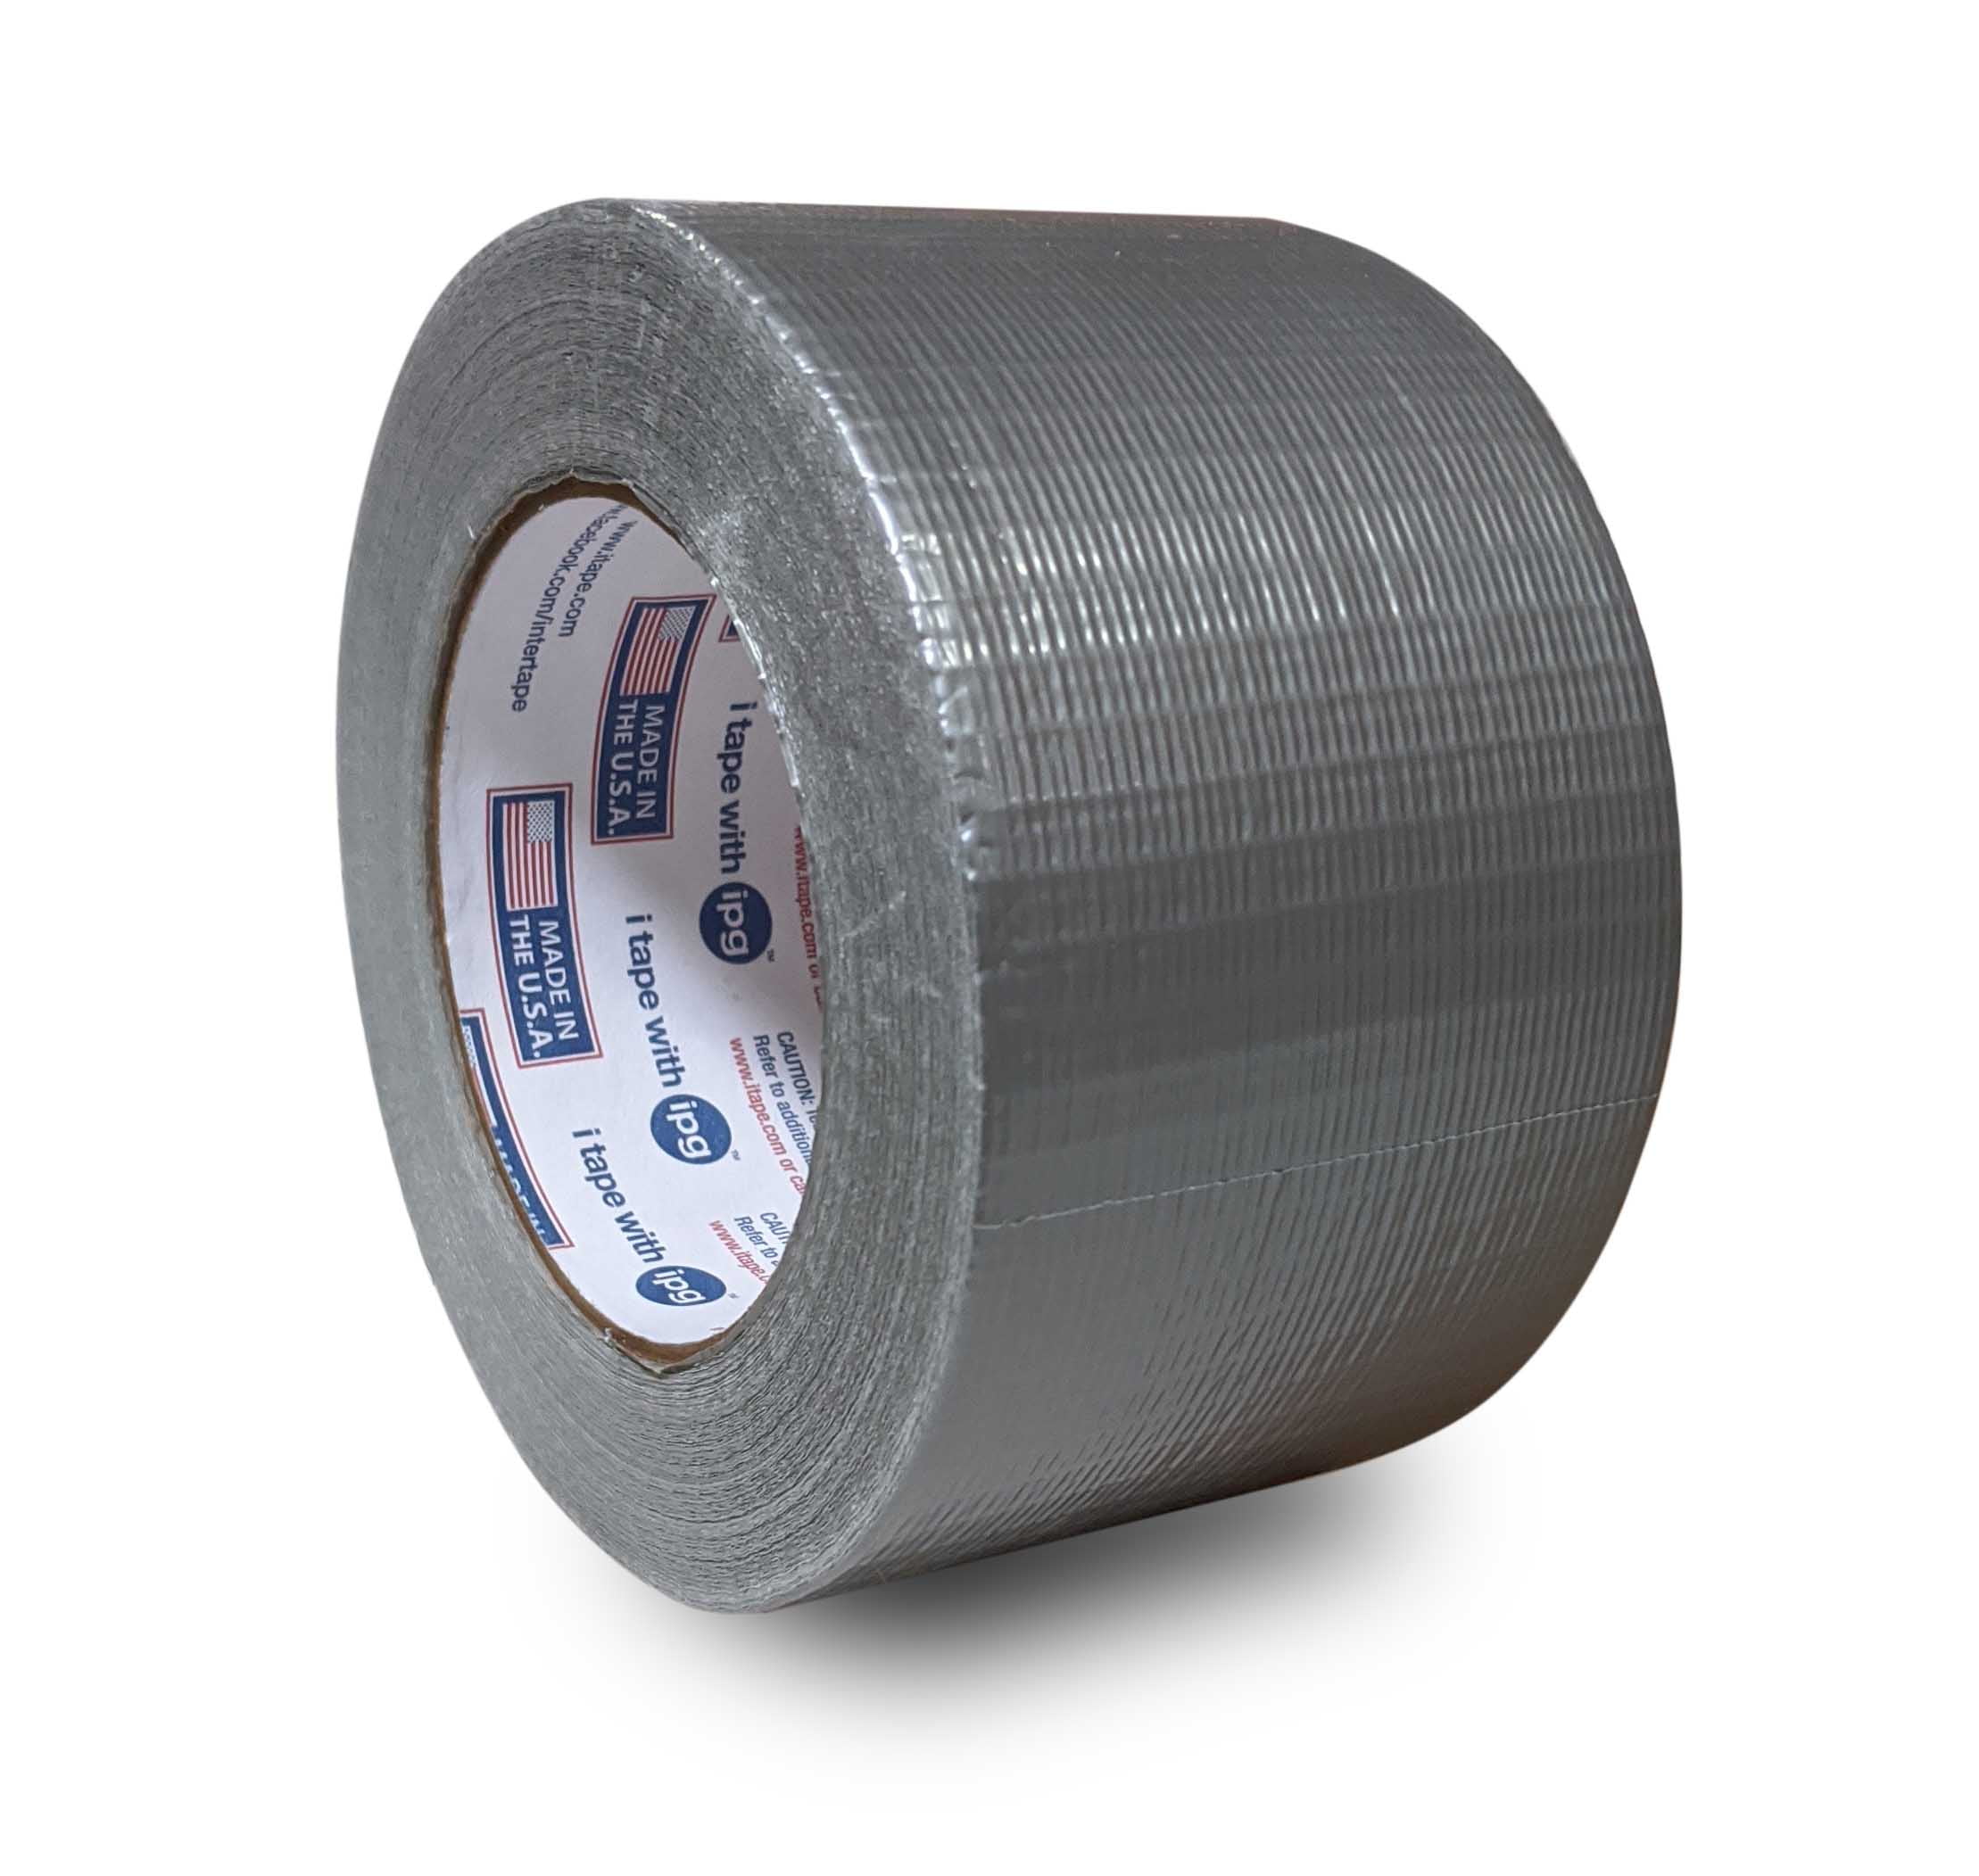 Bomgaars : Grip Heavy Duty Multi-Purpose Duct Tape, 2 IN x 35 YD : Duct Tape